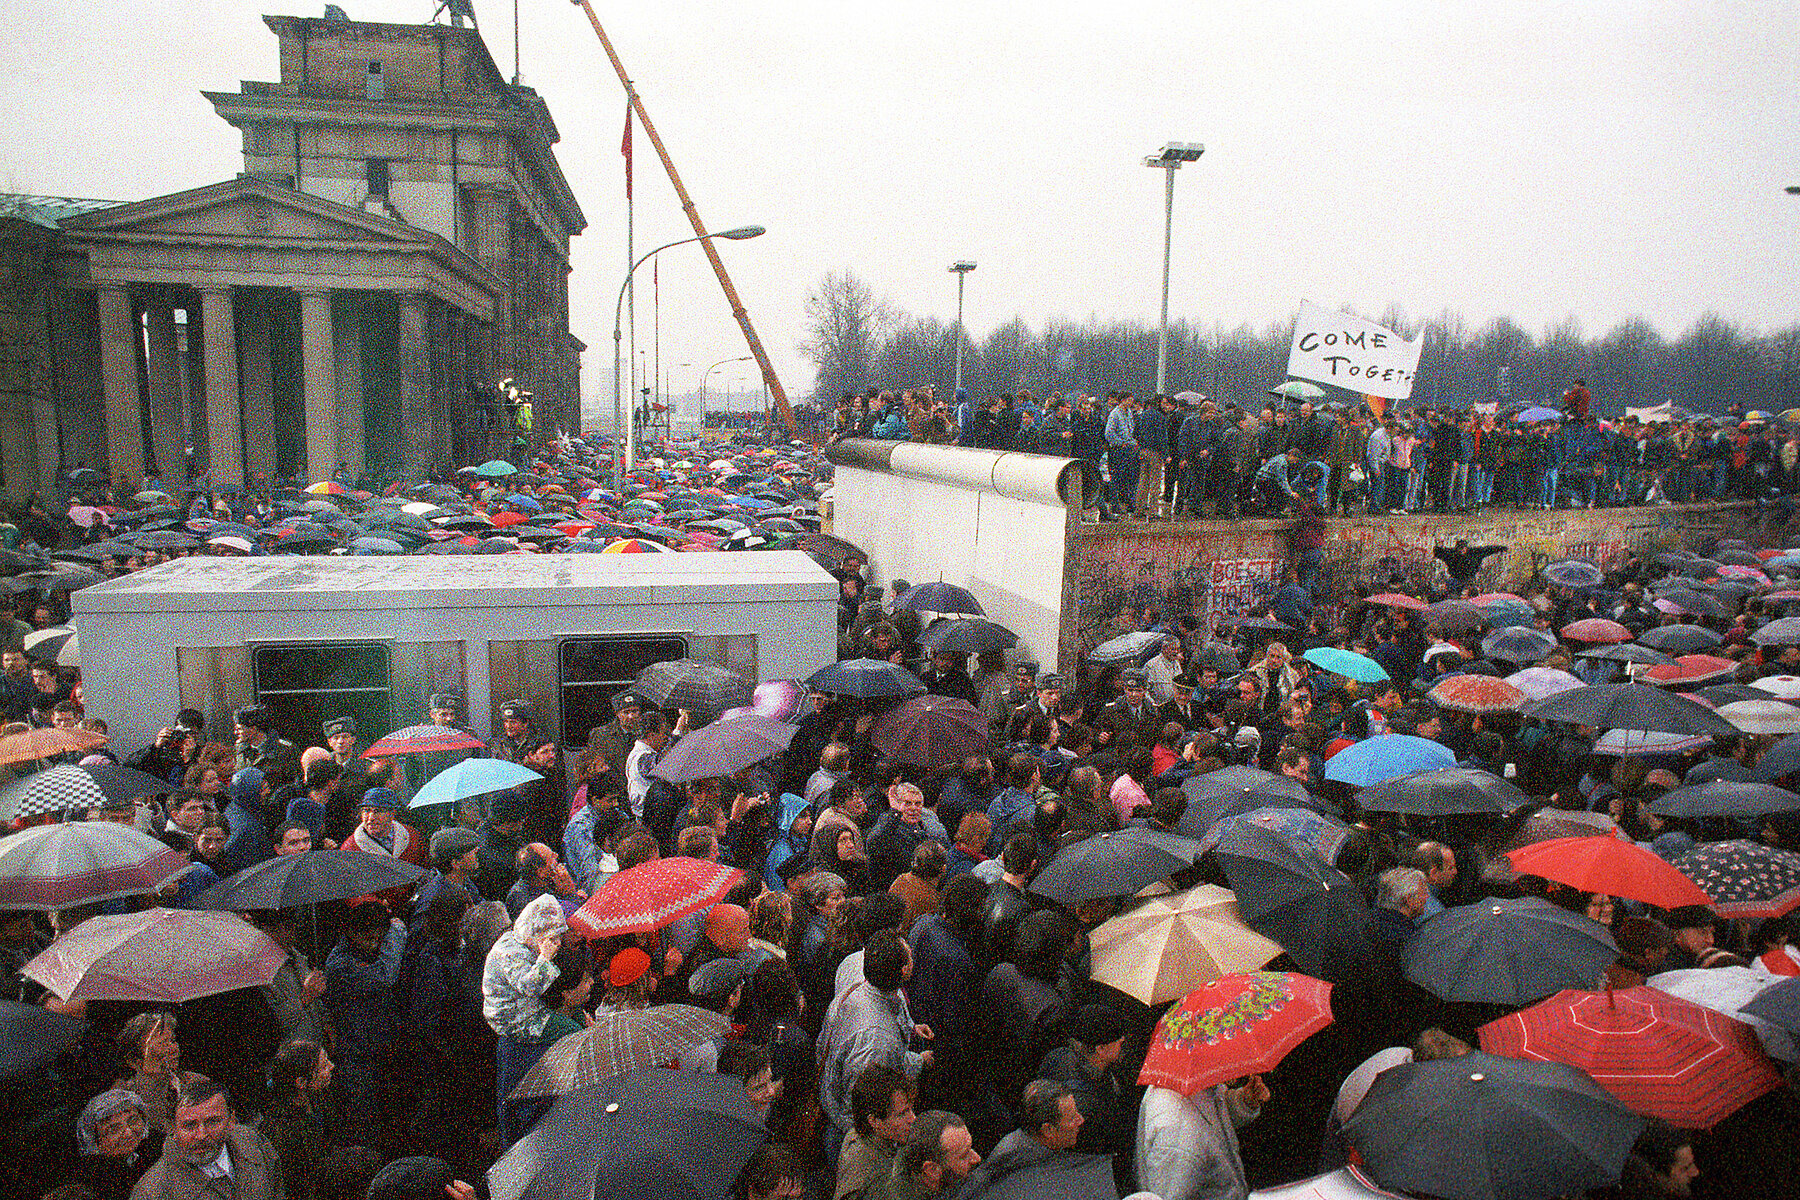 A container located to the side of the Brandenburg Gate was surrounded by many people with umbrellas. People on top of a Wall section held up a sign that read Come together.